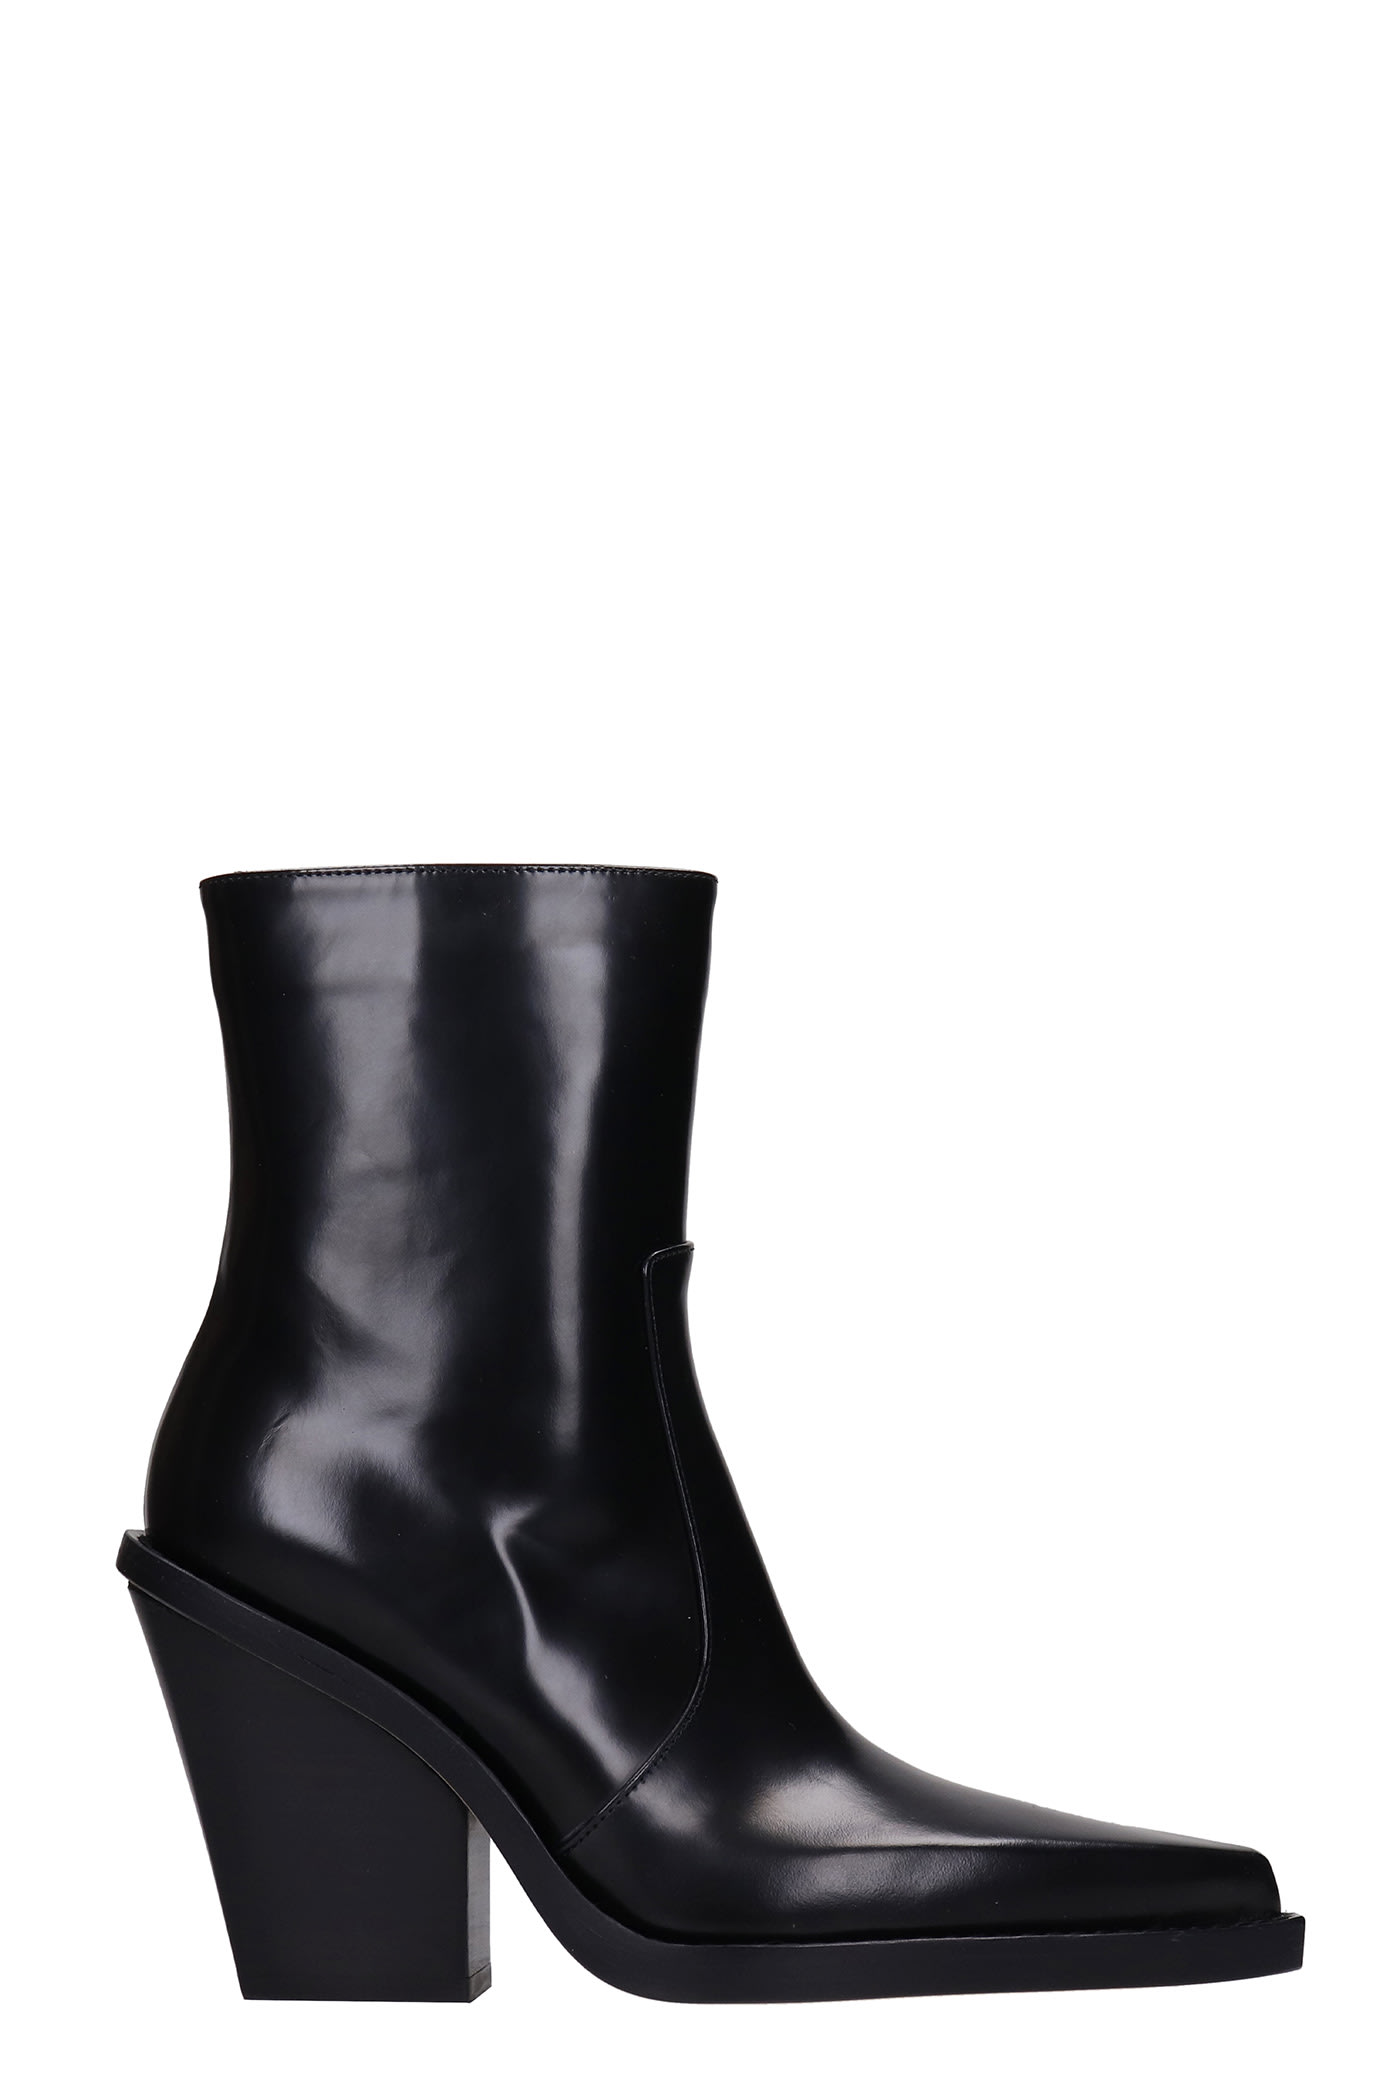 Paris Texas Rodeo Texan Ankle Boots In Black Leather